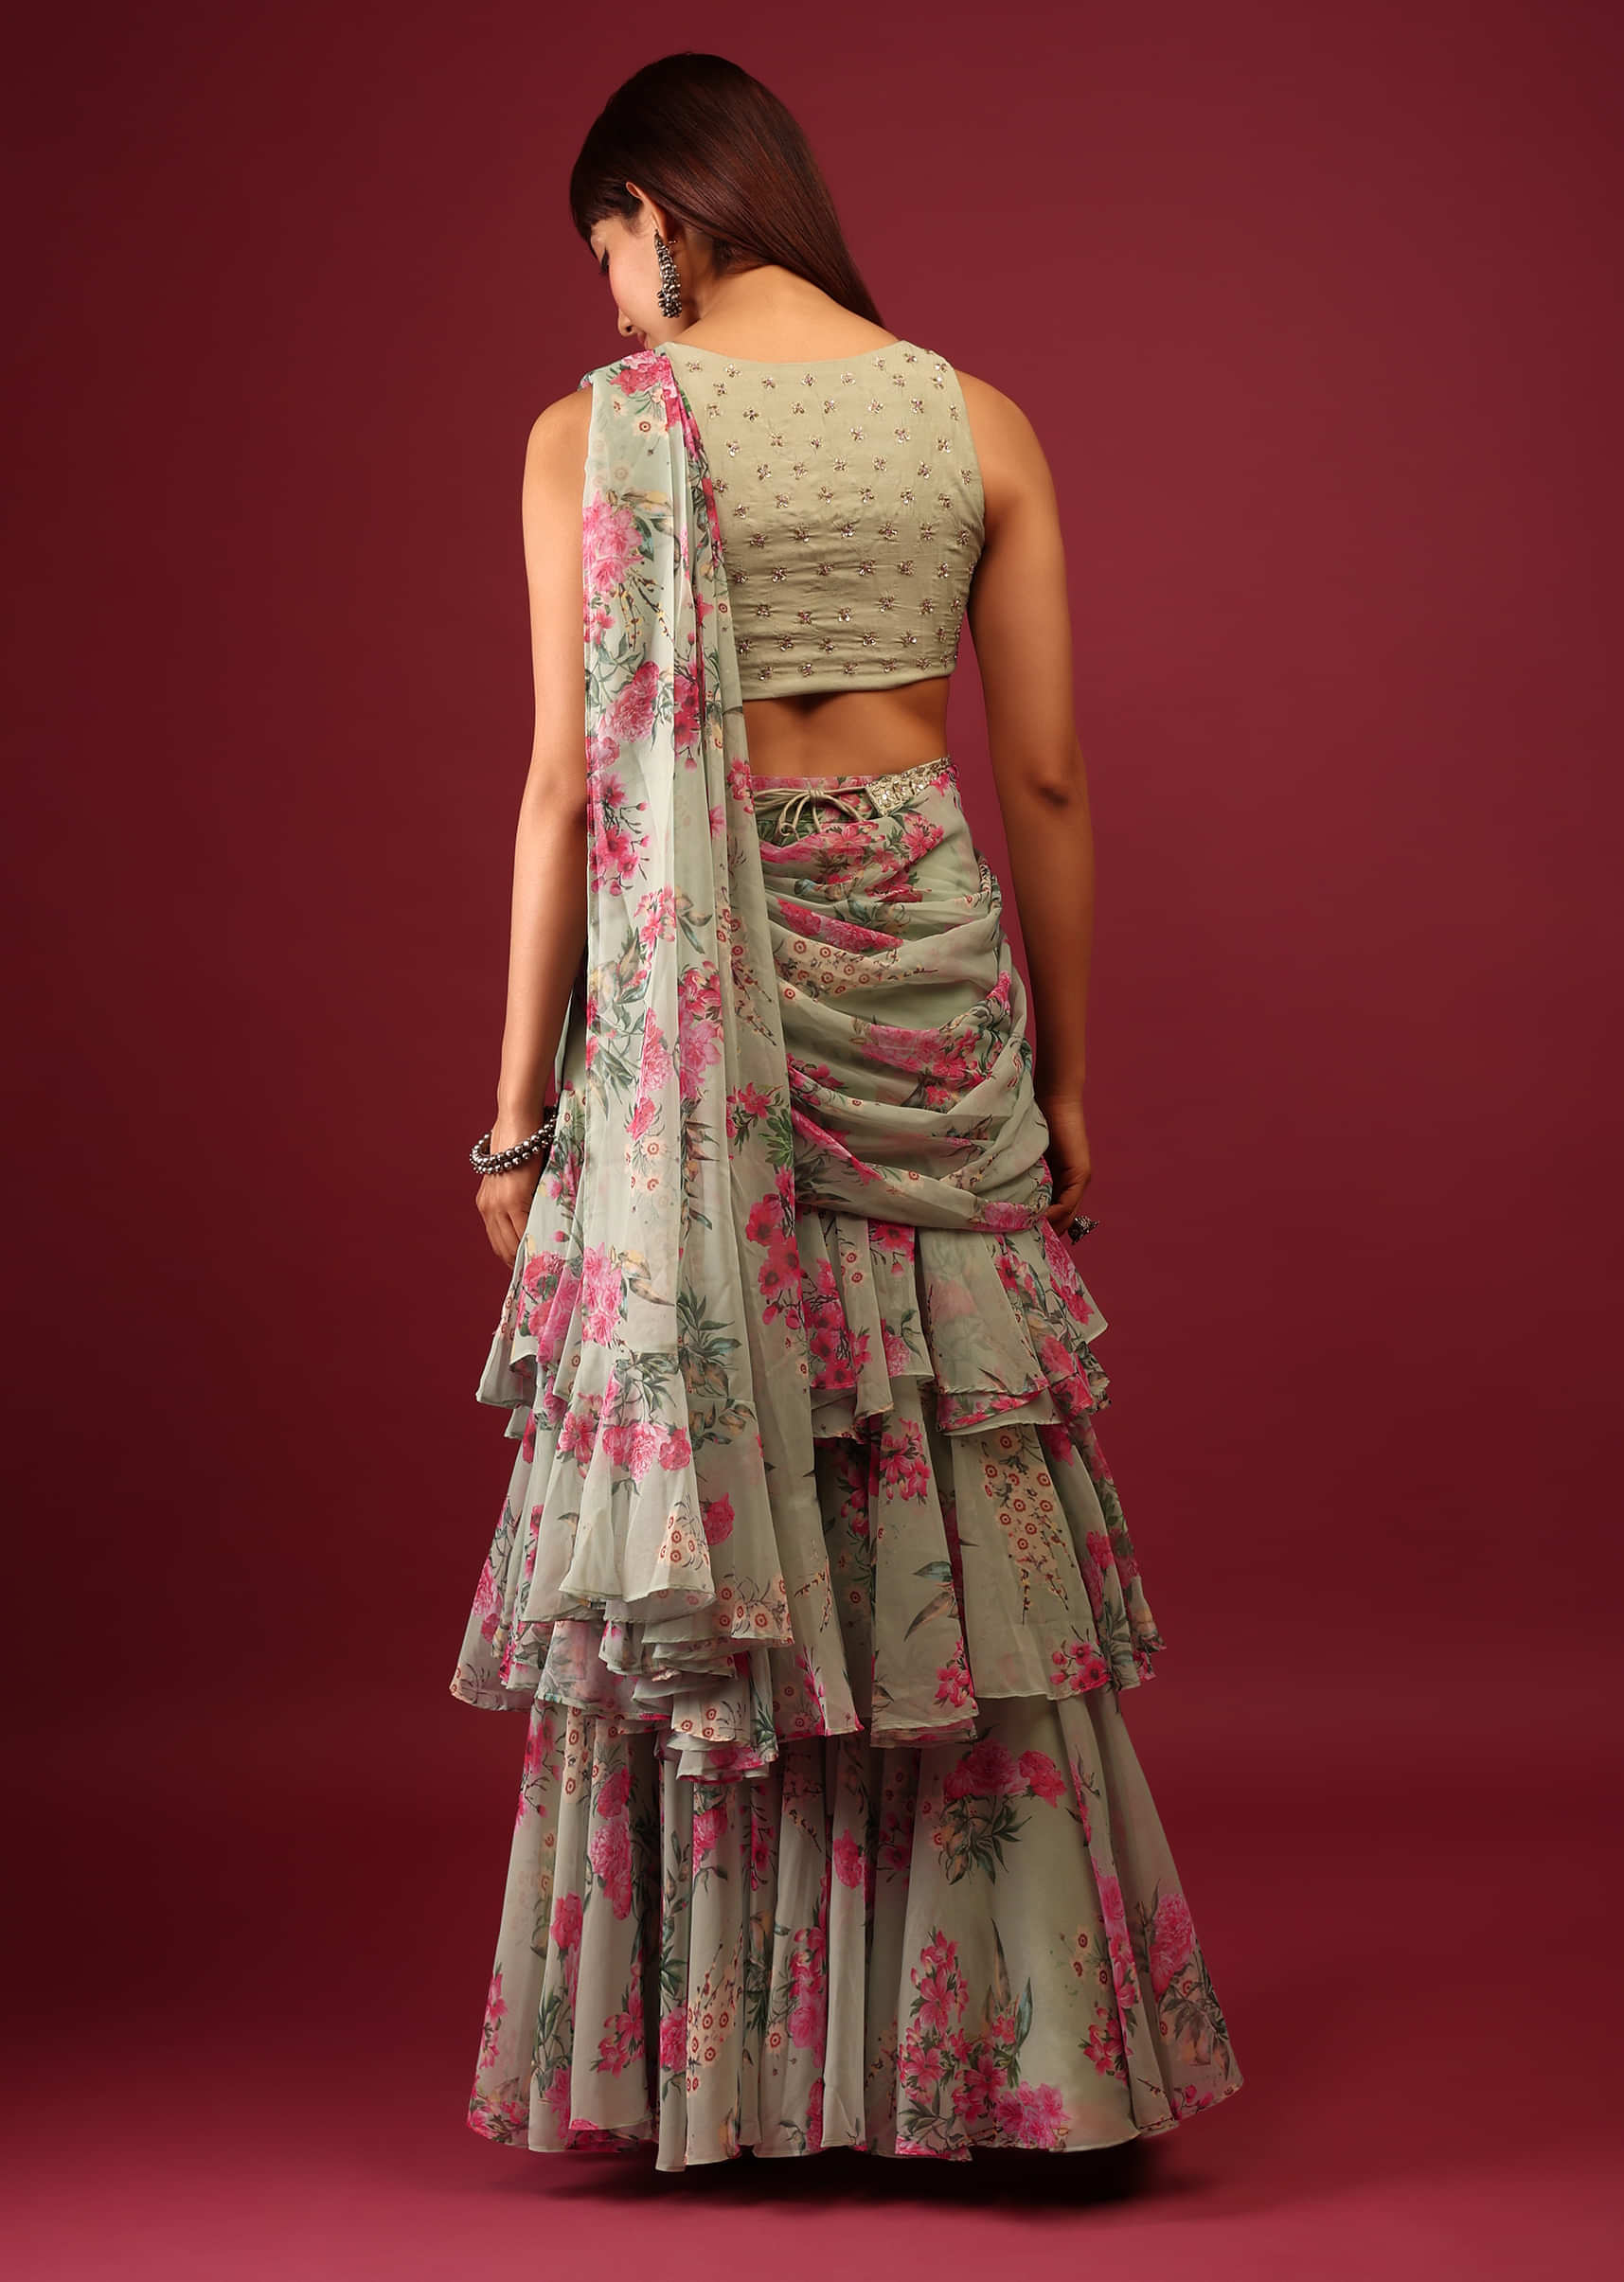 Mint Green Floral Print Pleated Lehenga Saree In Layered Frill Pattern With An Embellished Blouse